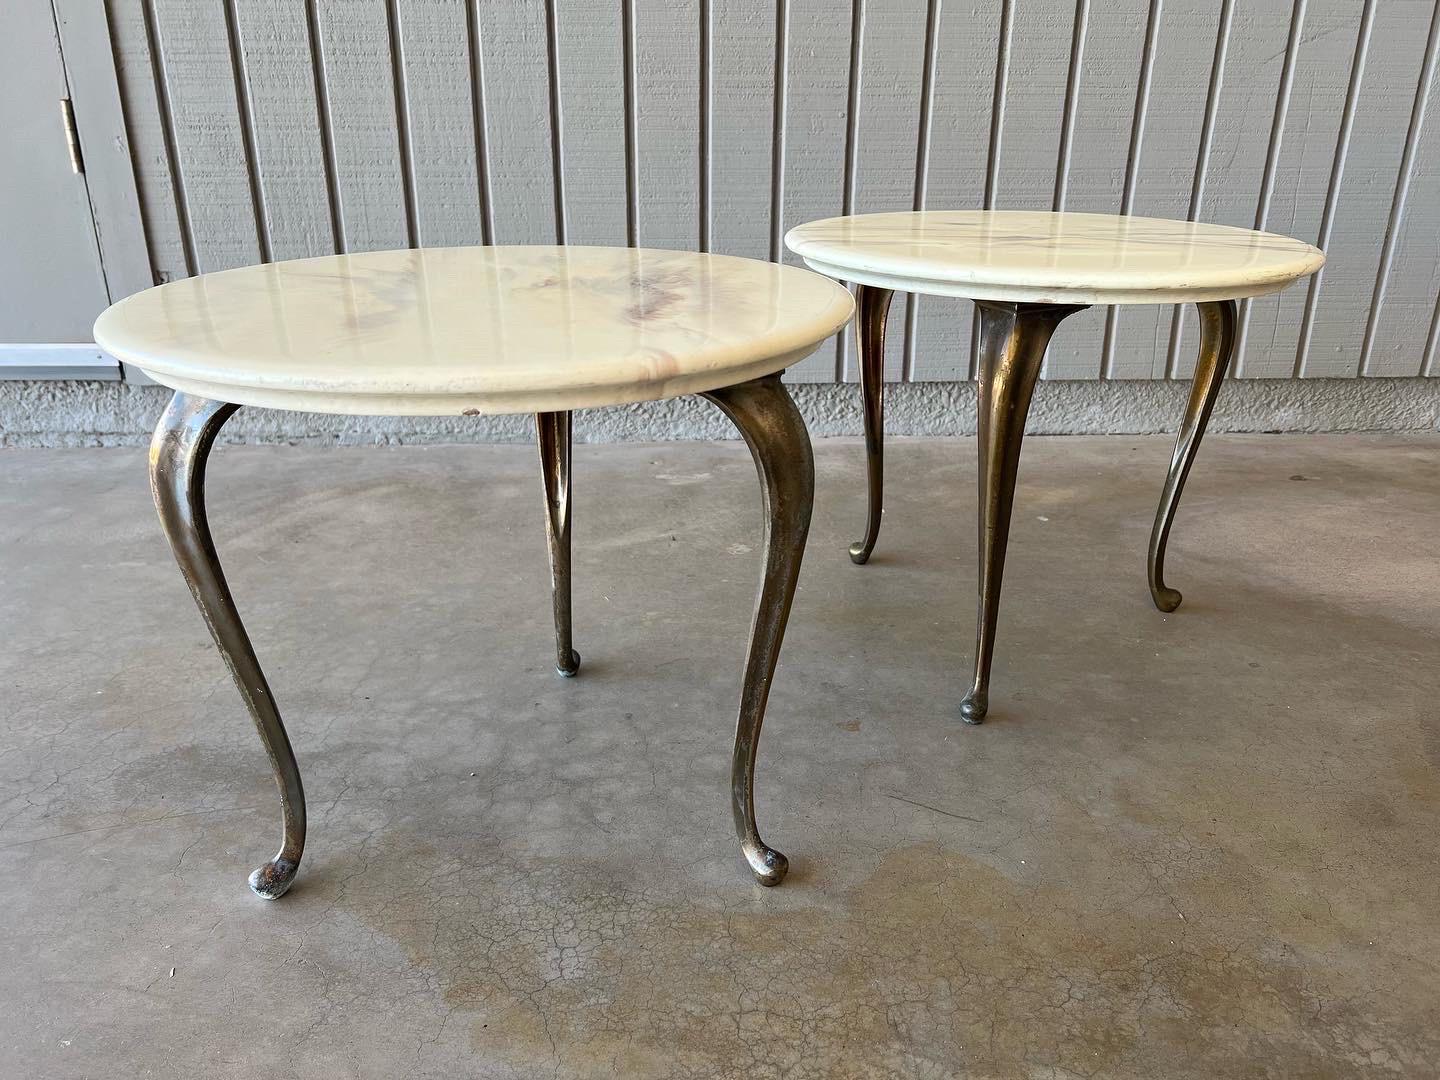 Pair of Hollywood Regency style end tables or plant stands by Marblecraft Company, 1963. The legs are brass, and the tops are faux marble over wood. There is a crack on one of the tops and a couple small chips. They are both labeled on the bottom.